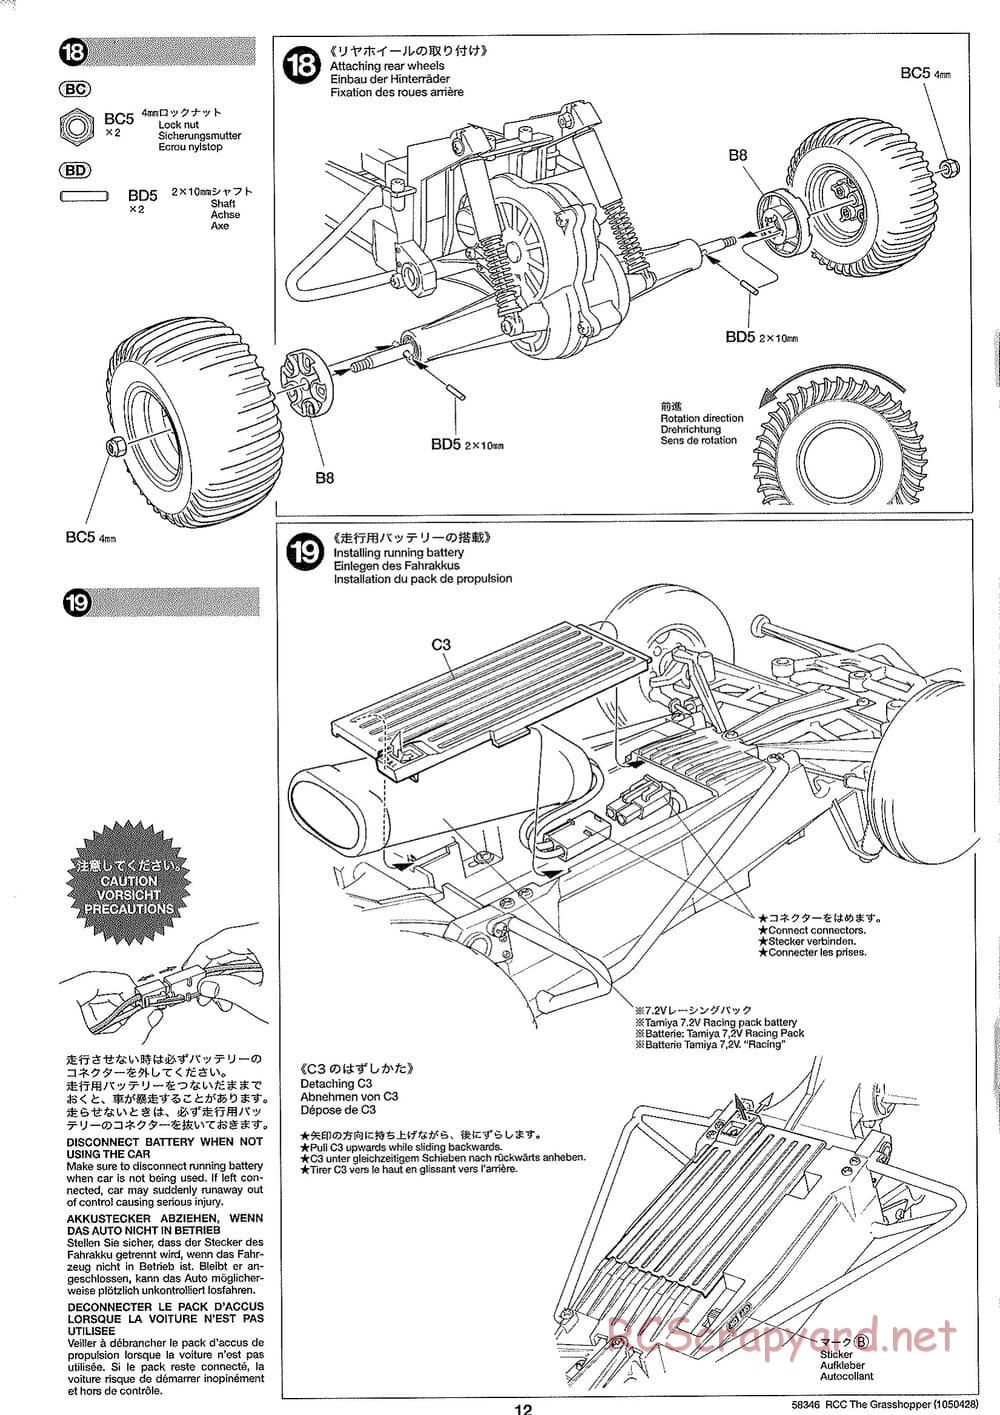 Tamiya - The Grasshopper (2005) - GH Chassis - Manual - Page 12